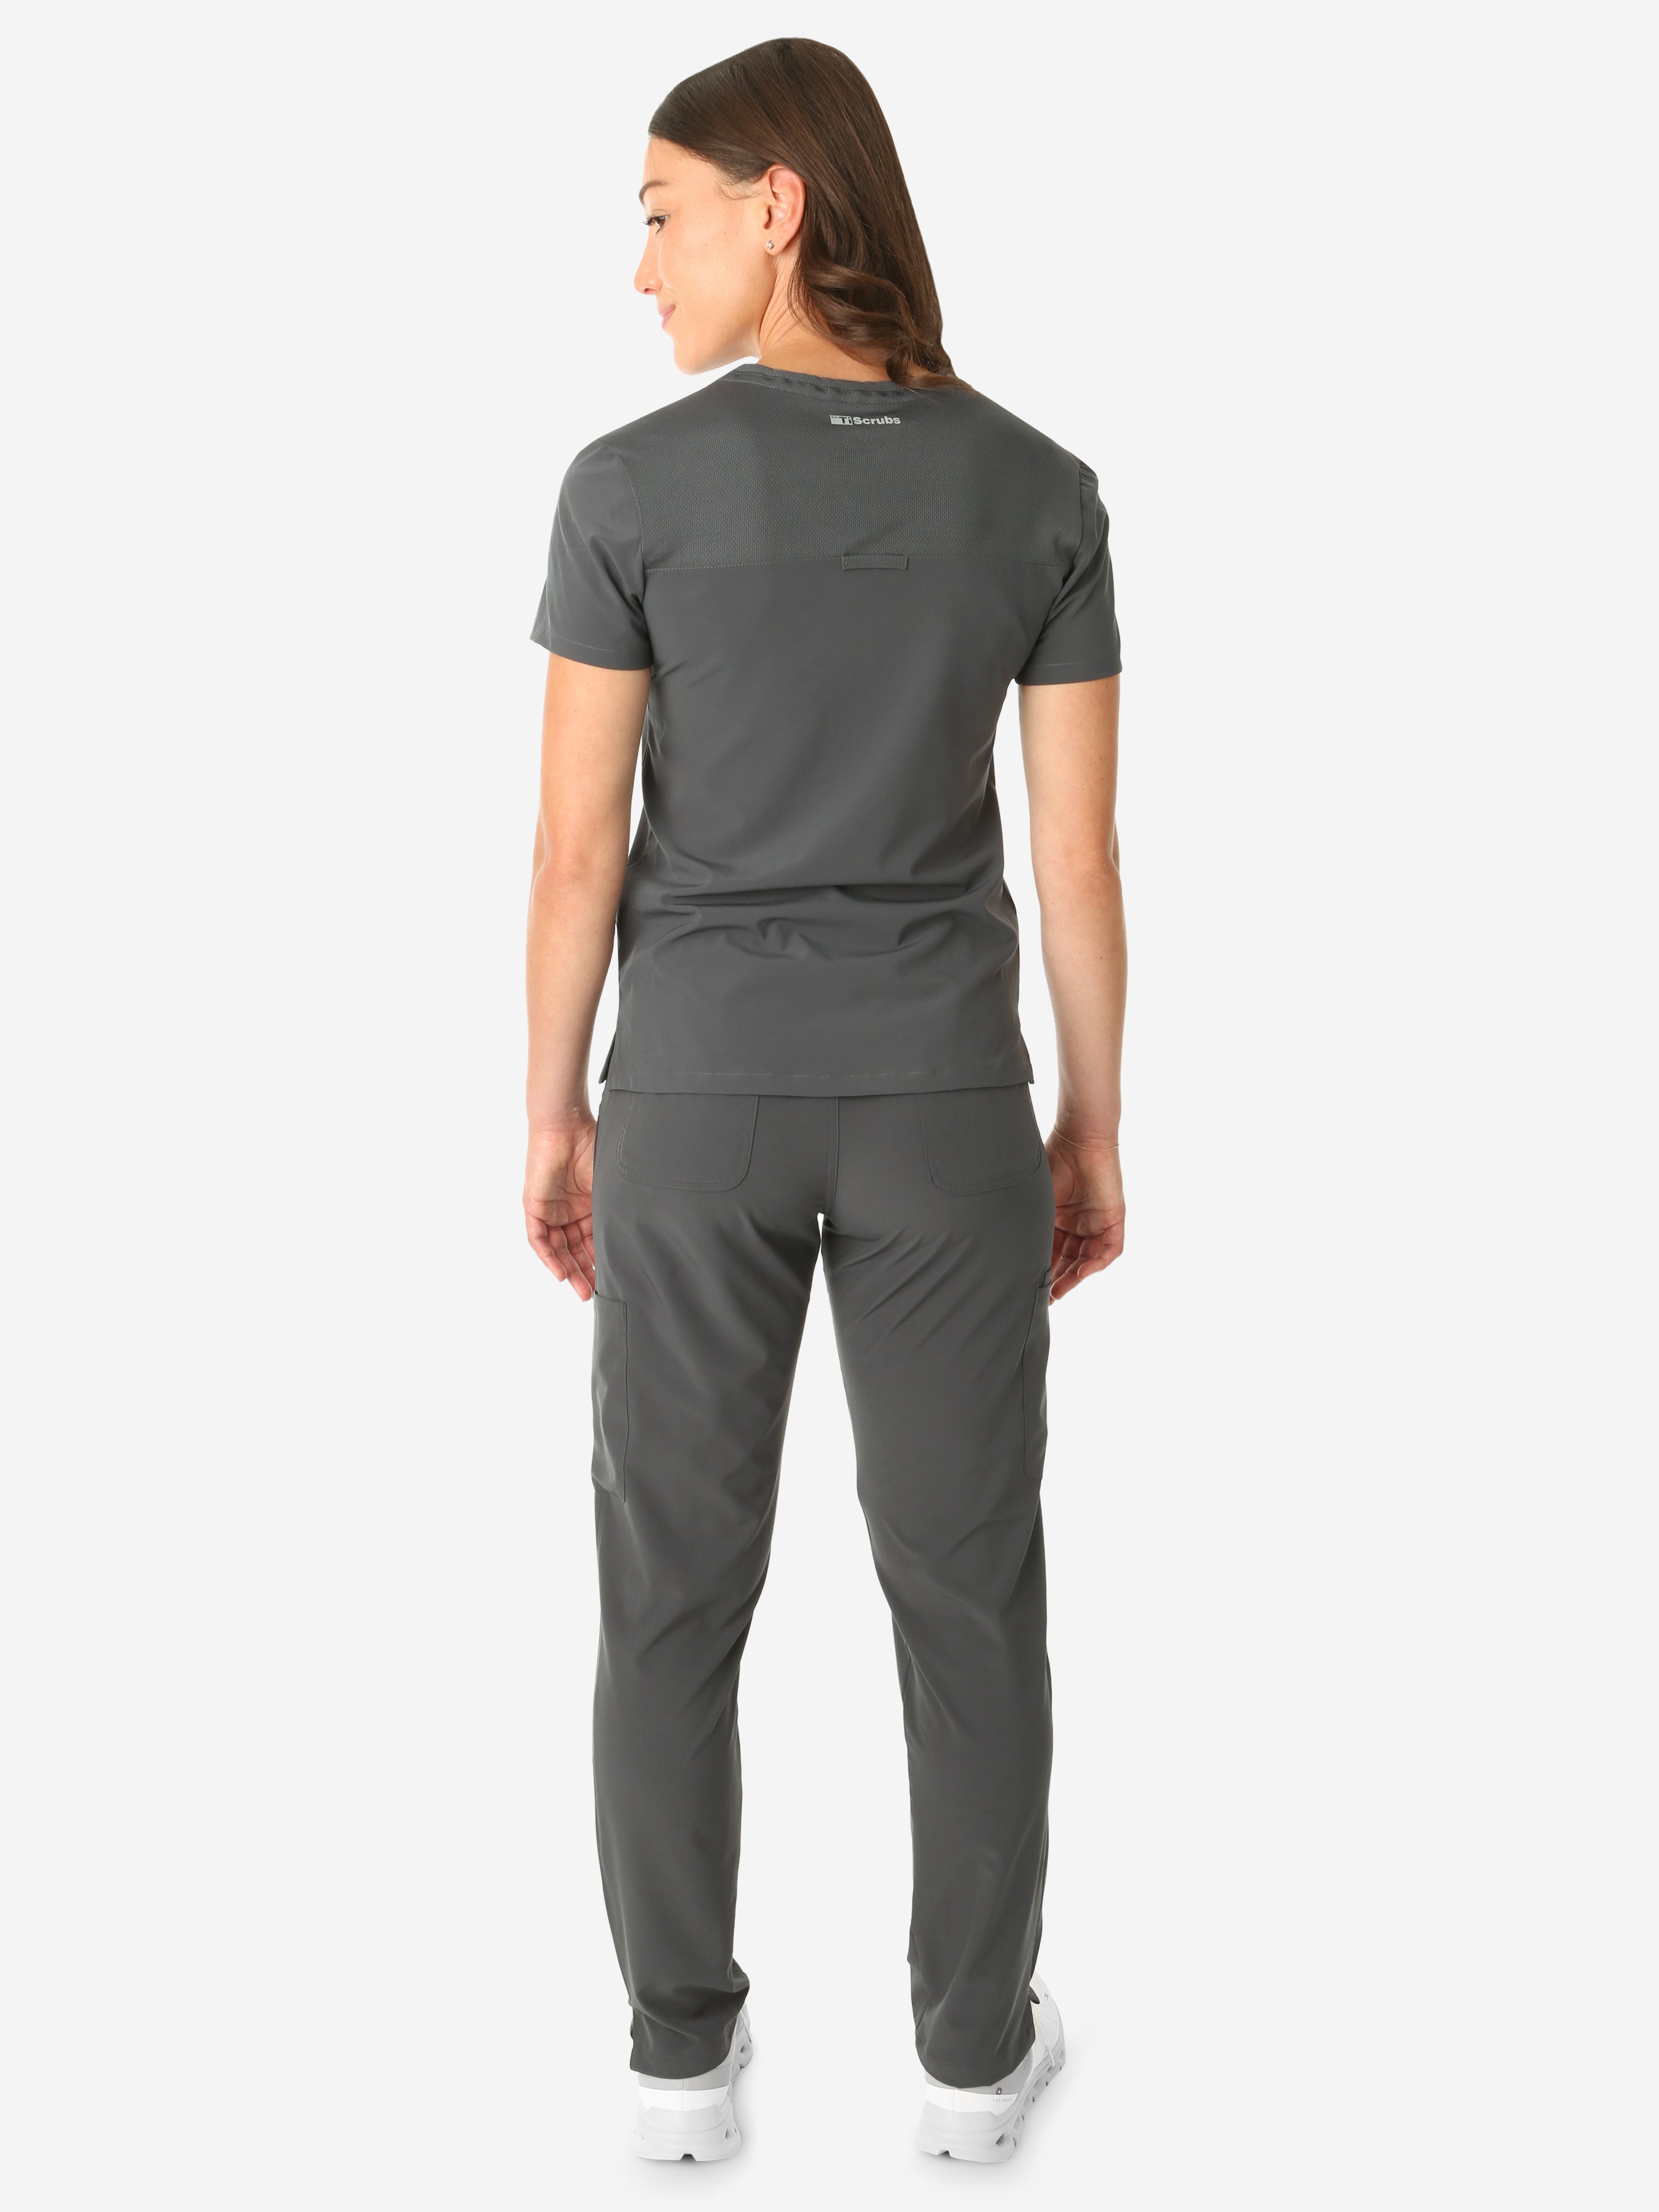 TiScrubs Charcoal Gray Women&#39;s Stretch 9-Pocket Pants and One-Pocket Tuckable Top Back View Full Body